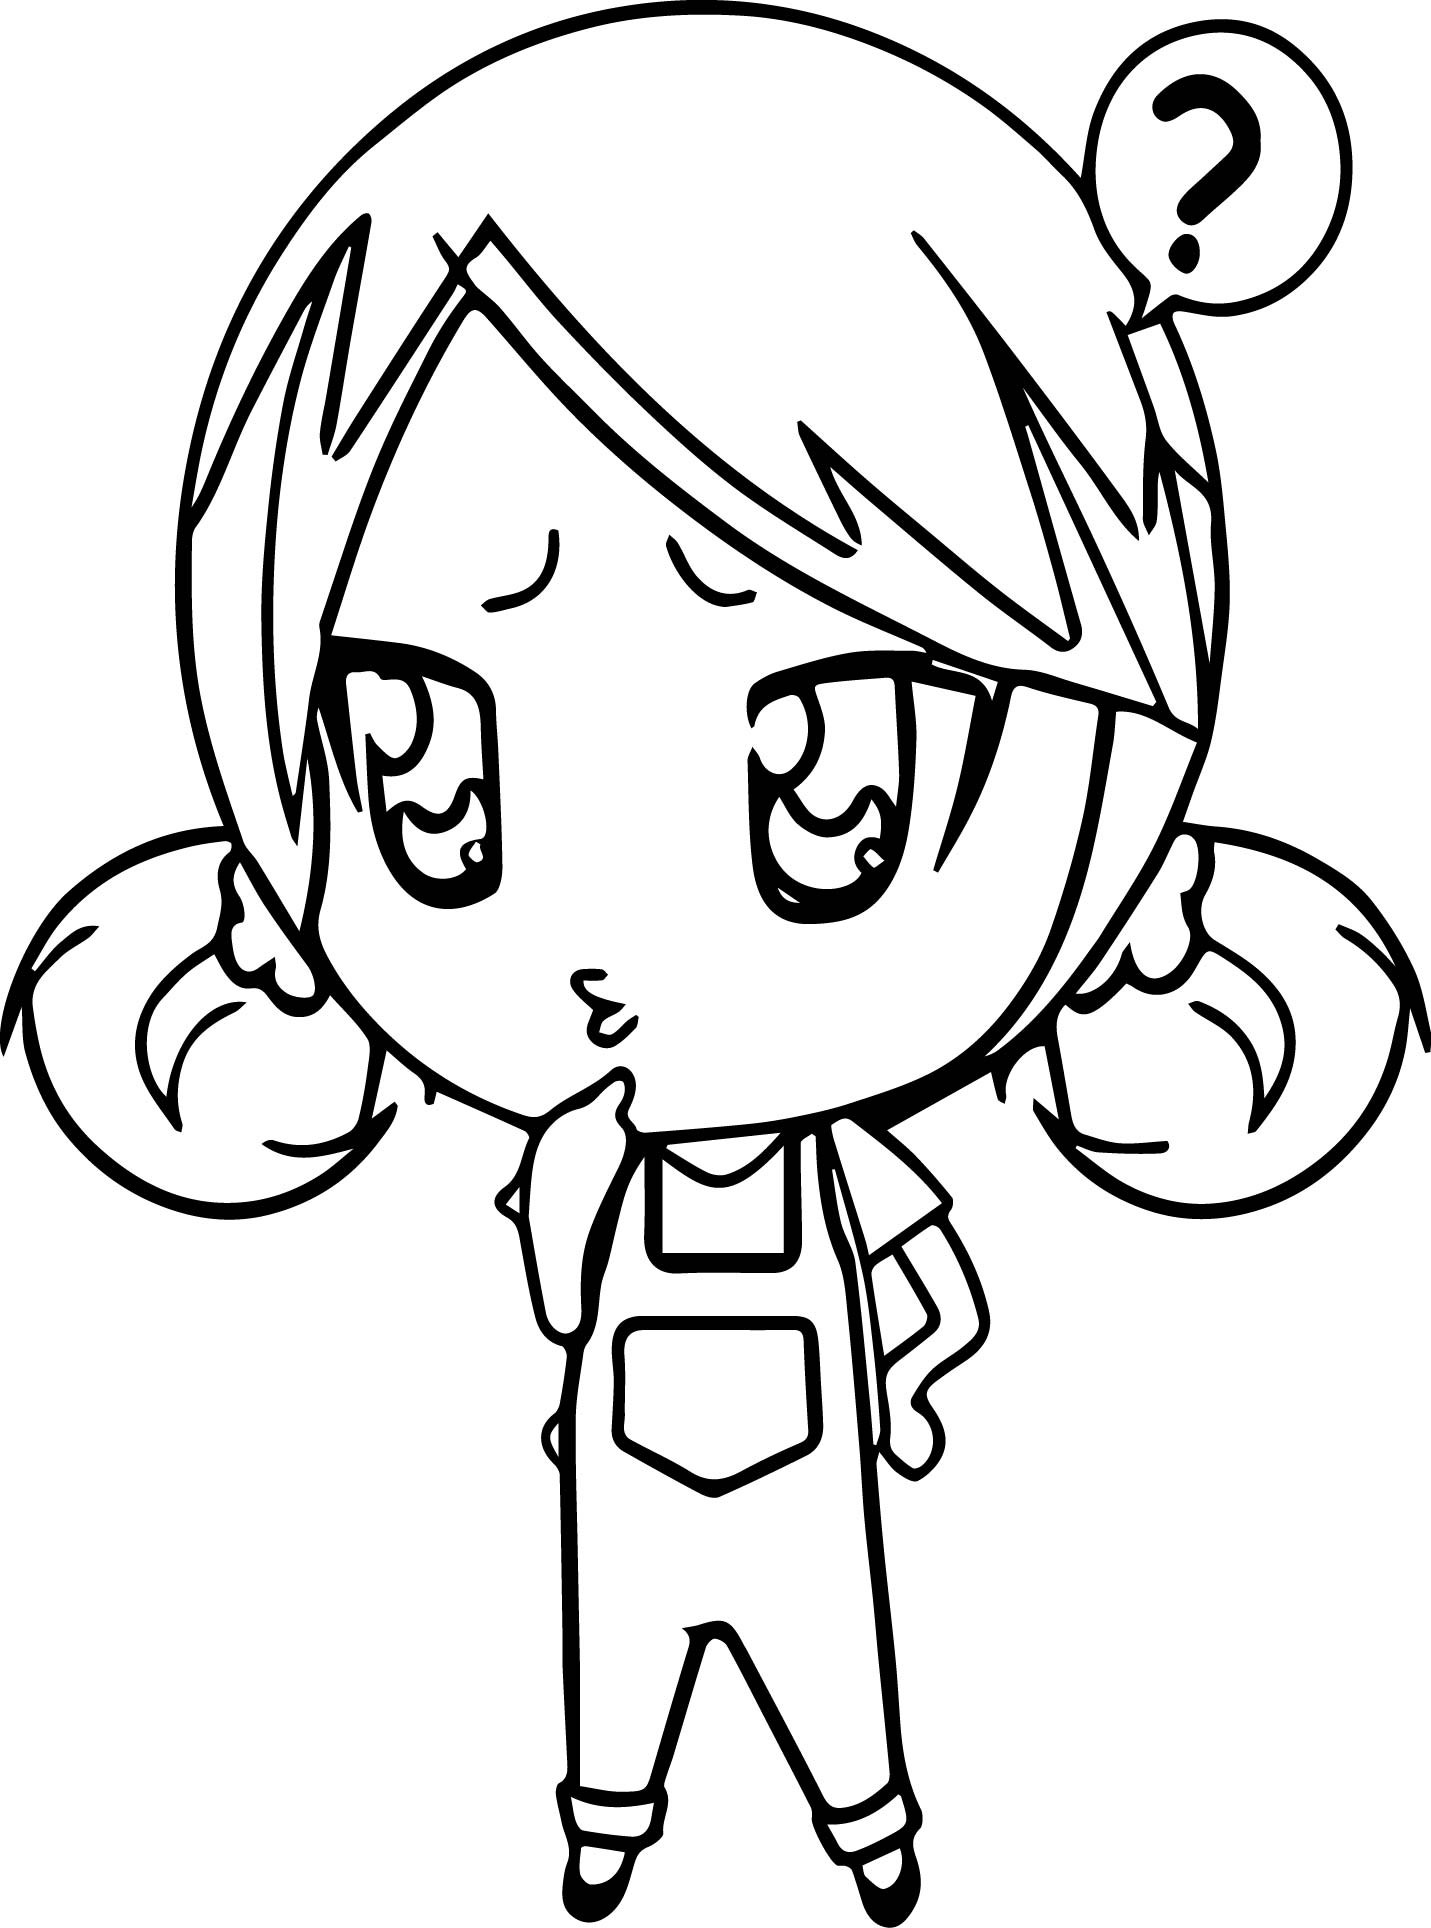 Chibi Anime Girl Coloring Pages
 Anime Chibi Girl Coloring Page